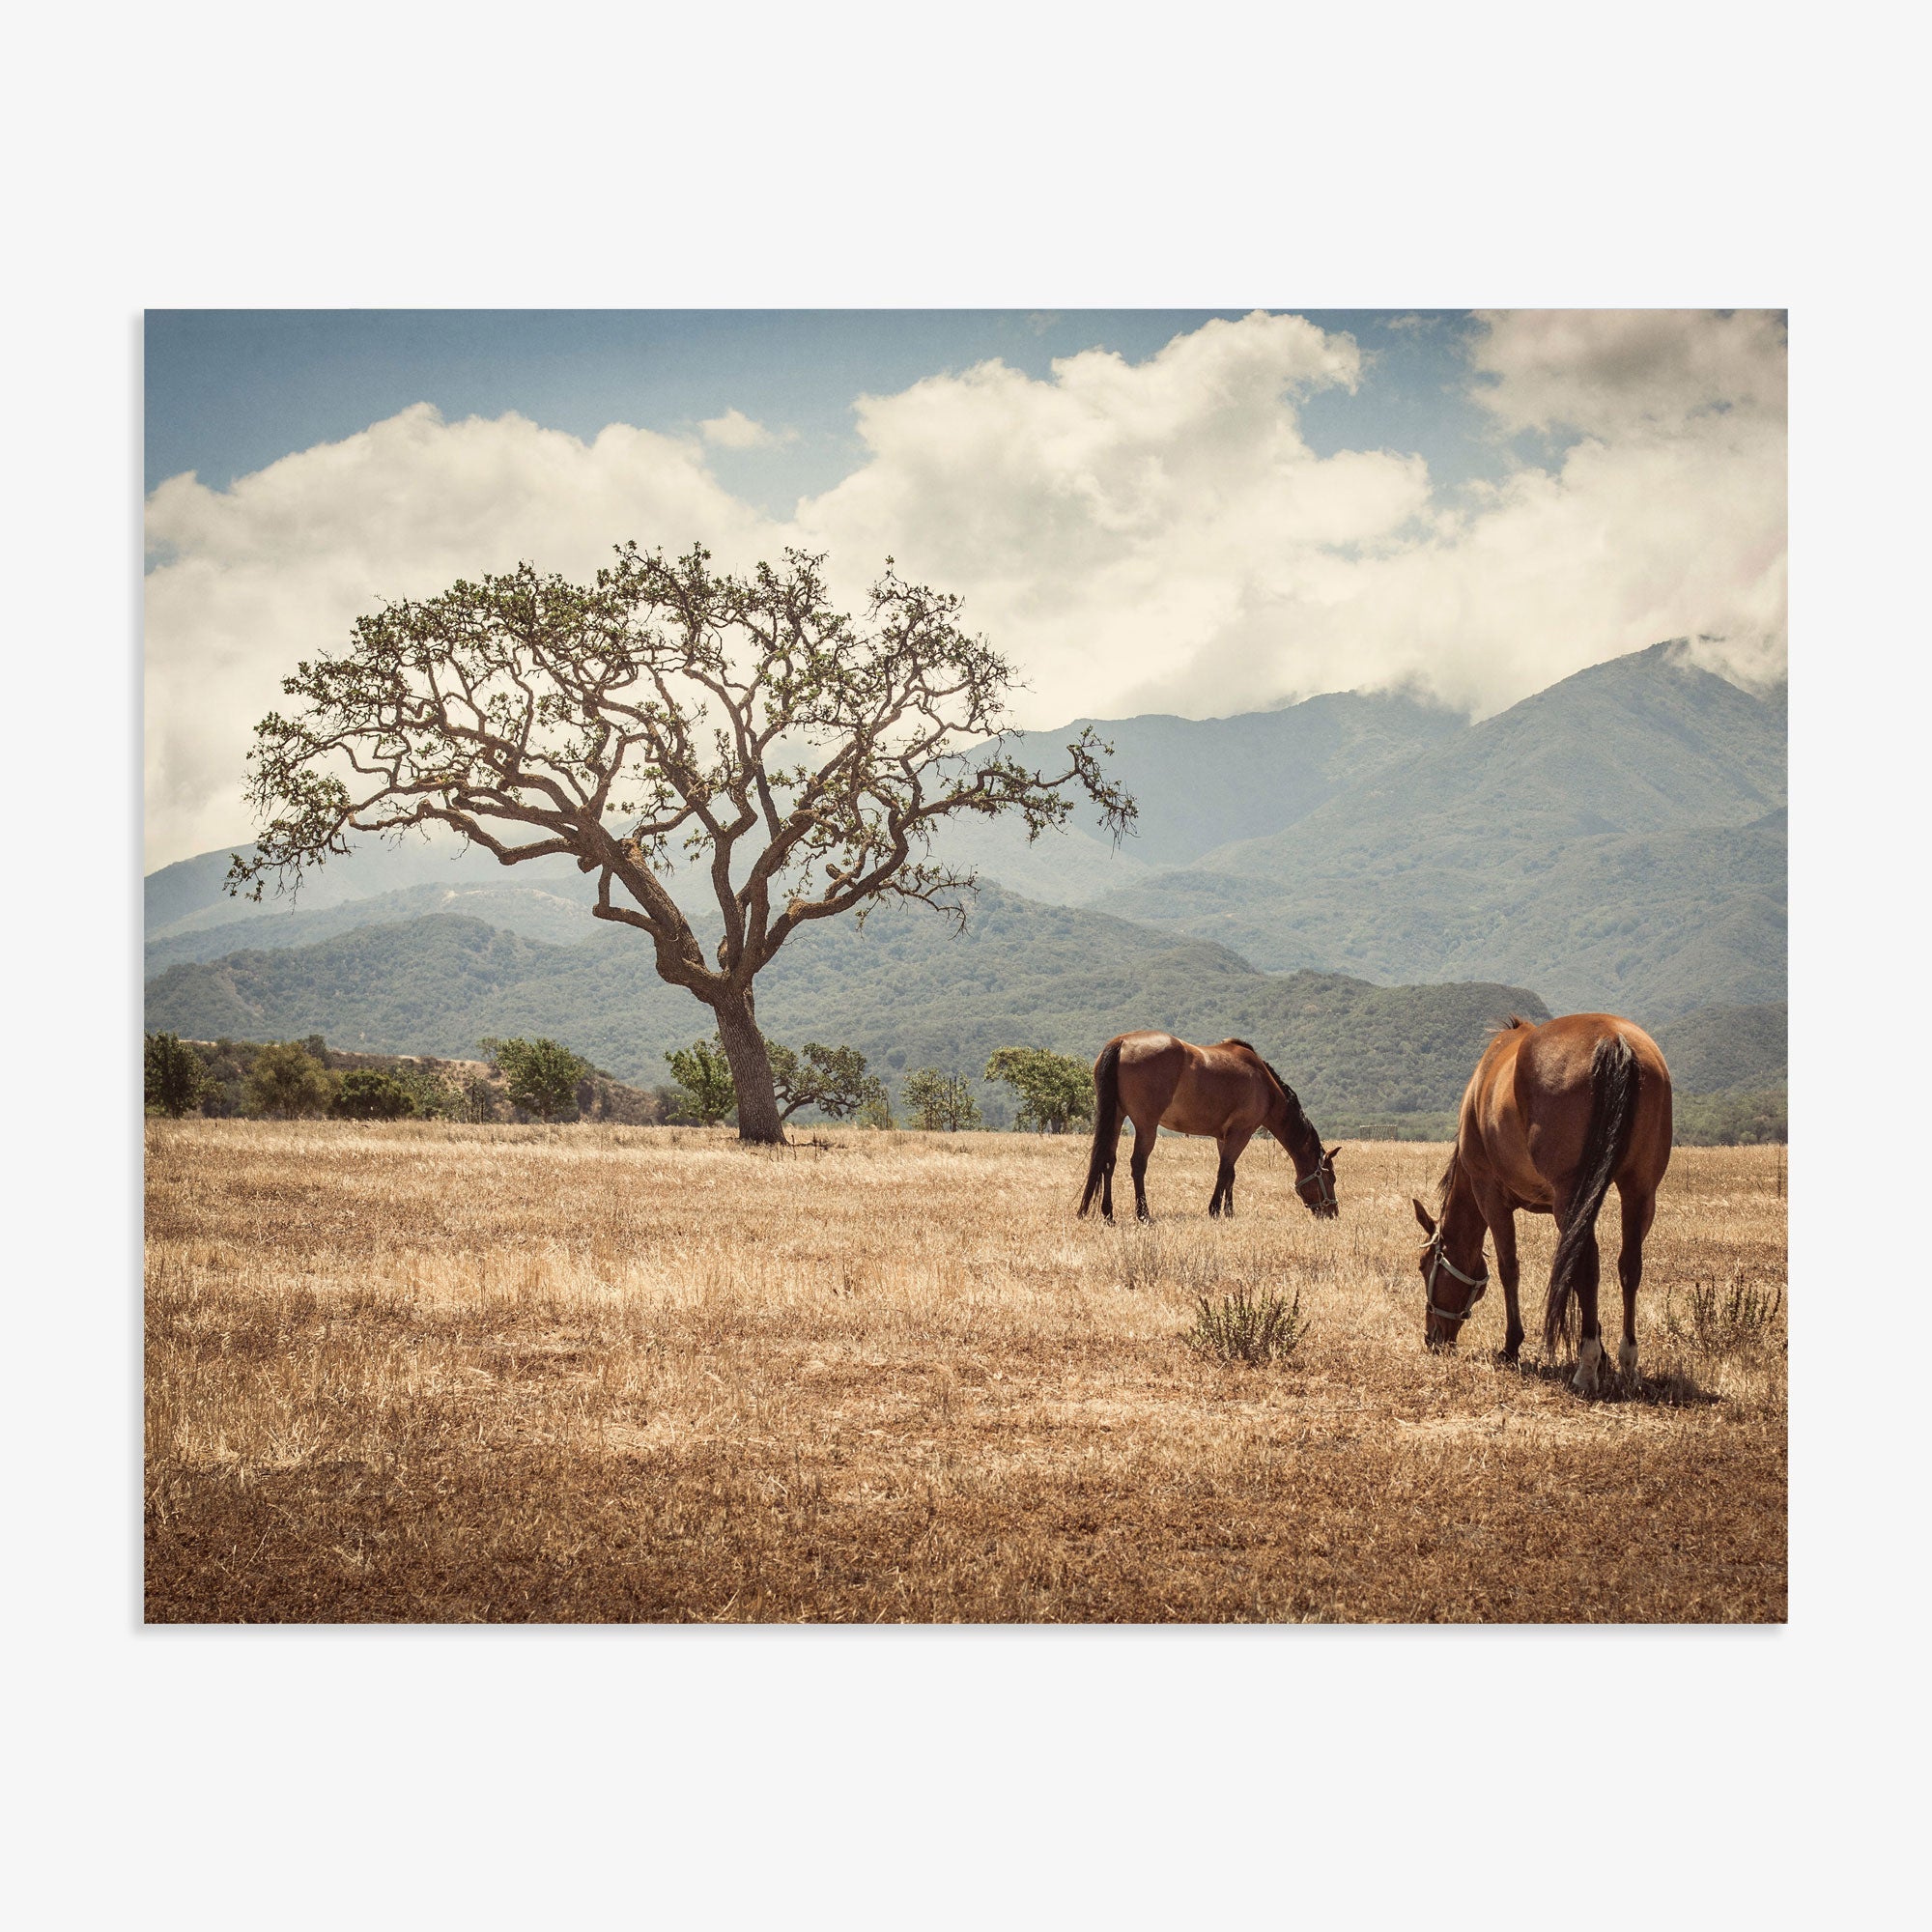 Two &#39;Santa Ynez Horses&#39; grazing peacefully in the sunlit Santa Ynez Valley with a large, solitary tree and mountain range in the background, evoking a serene, pastoral scene.